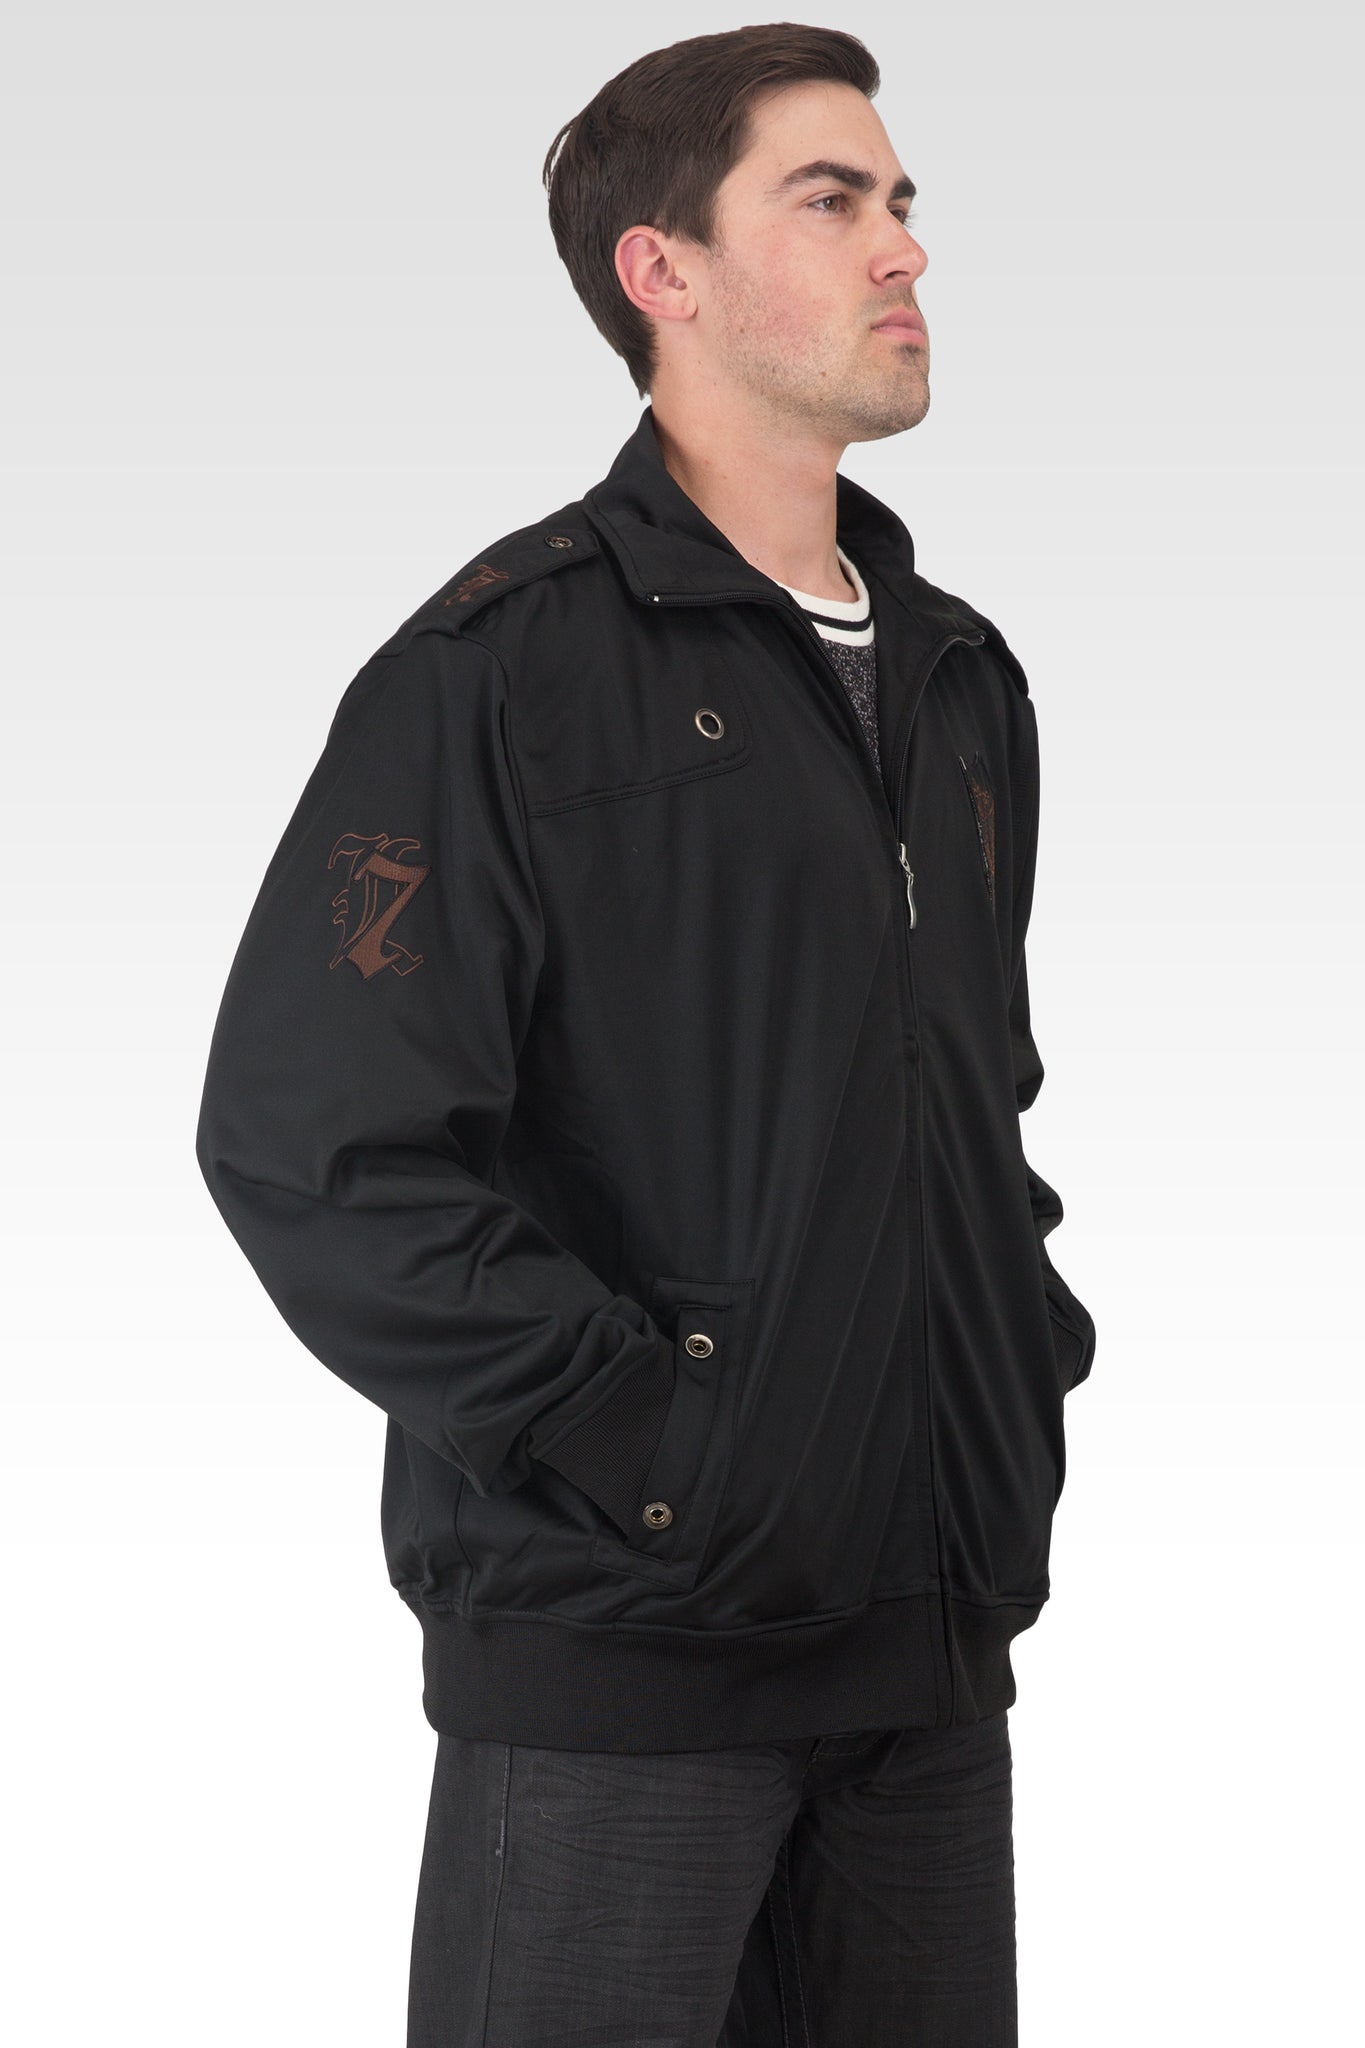 Men's Black Poly Performance Full Zip Track Jacket With Brown Embroidery Patches